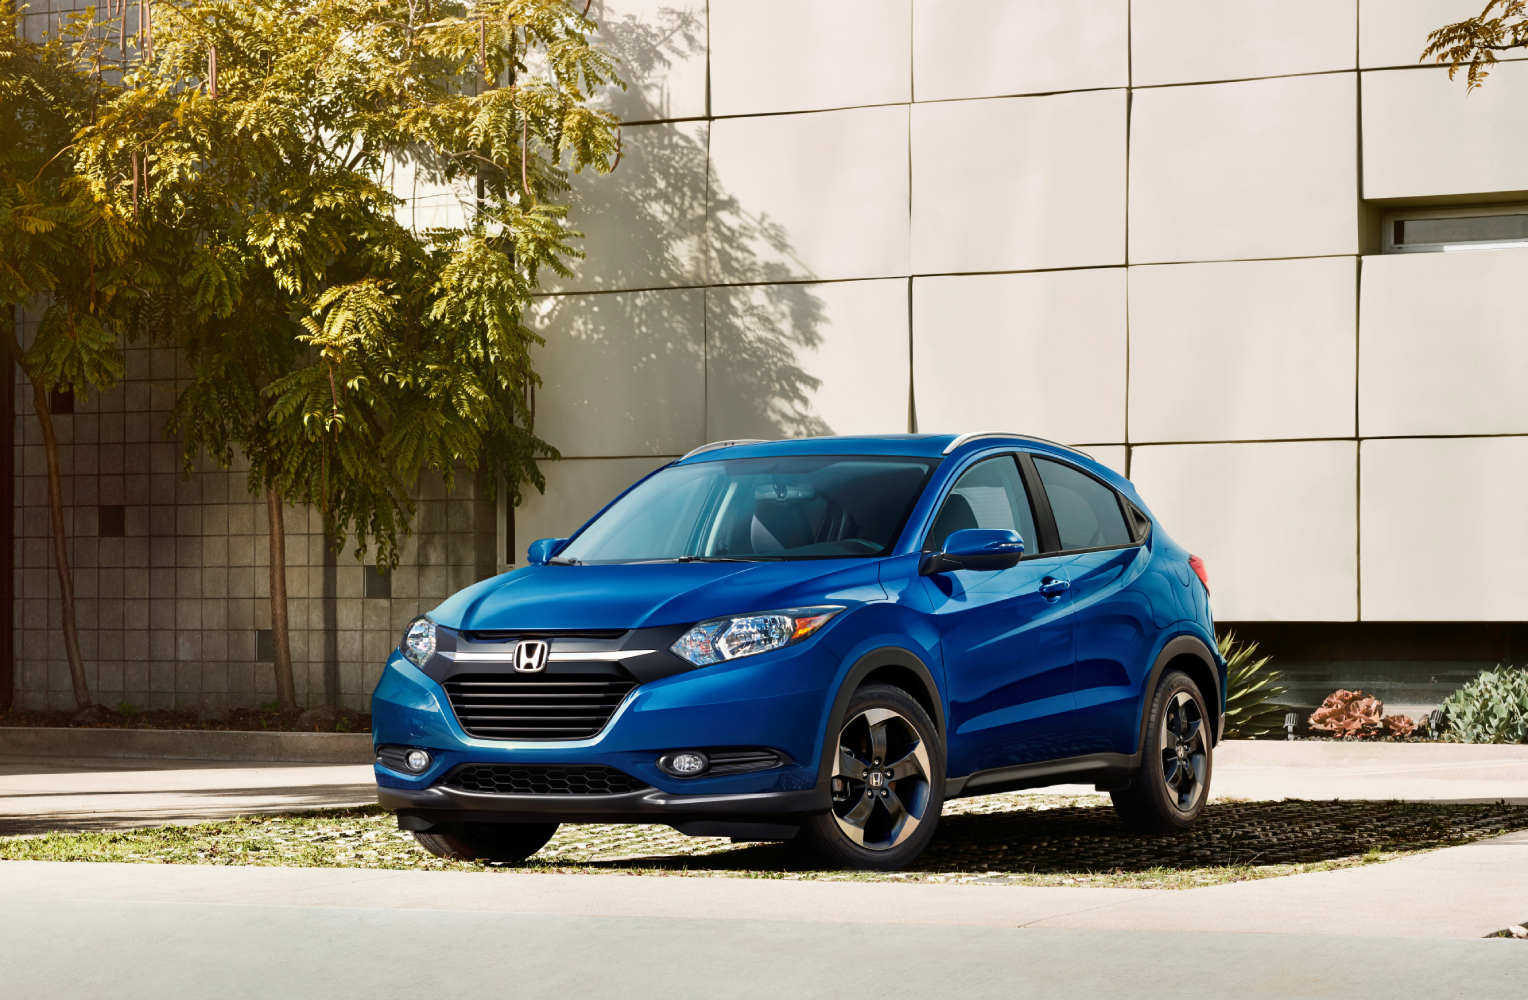 The best used subcompact SUVs according to Kelley Blue Book